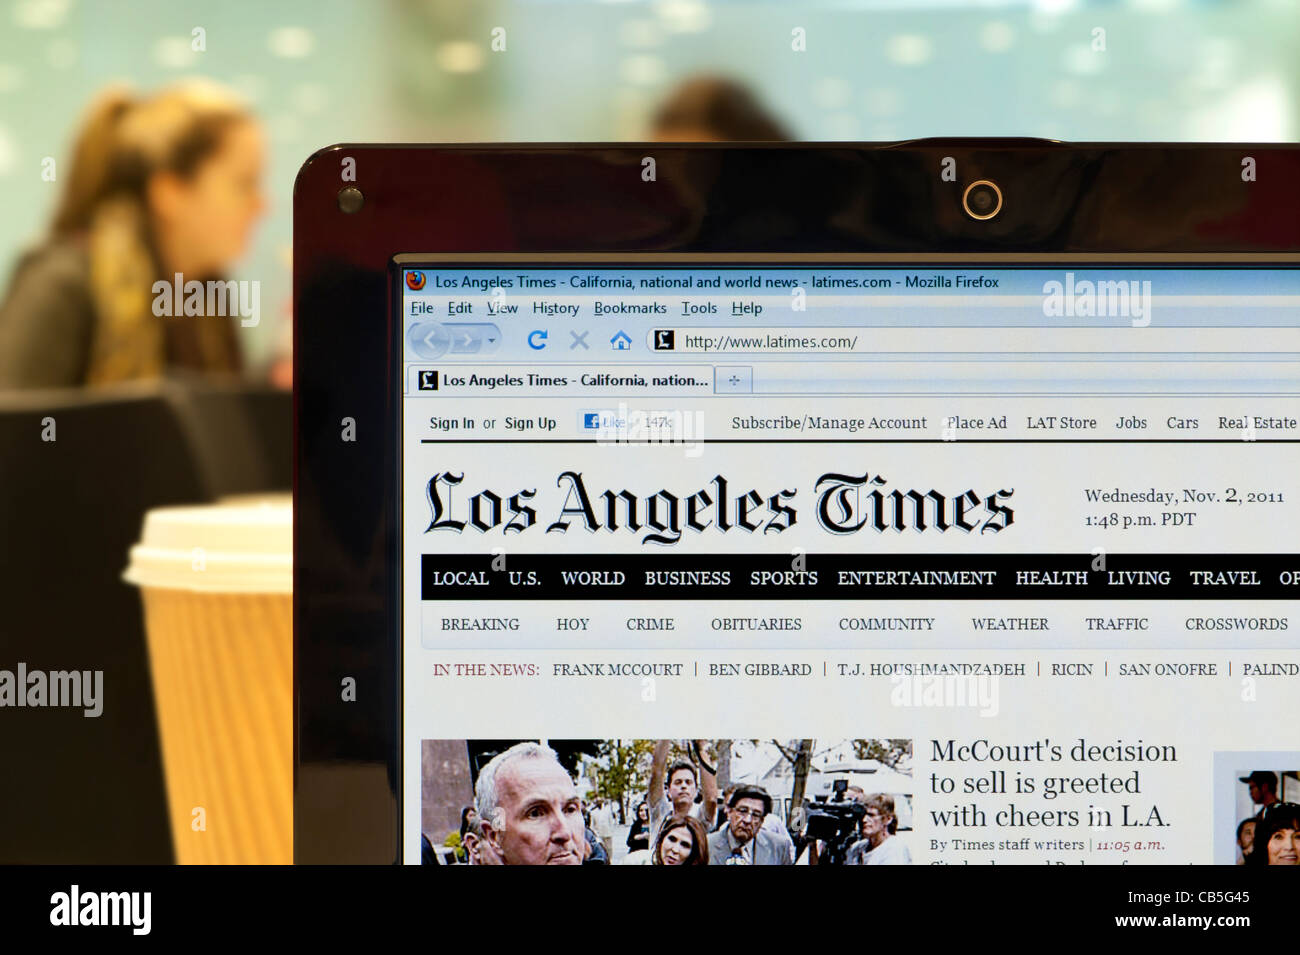 The Los Angeles Times website shot in a coffee shop environment (Editorial use only: print, TV, e-book and editorial website). Stock Photo